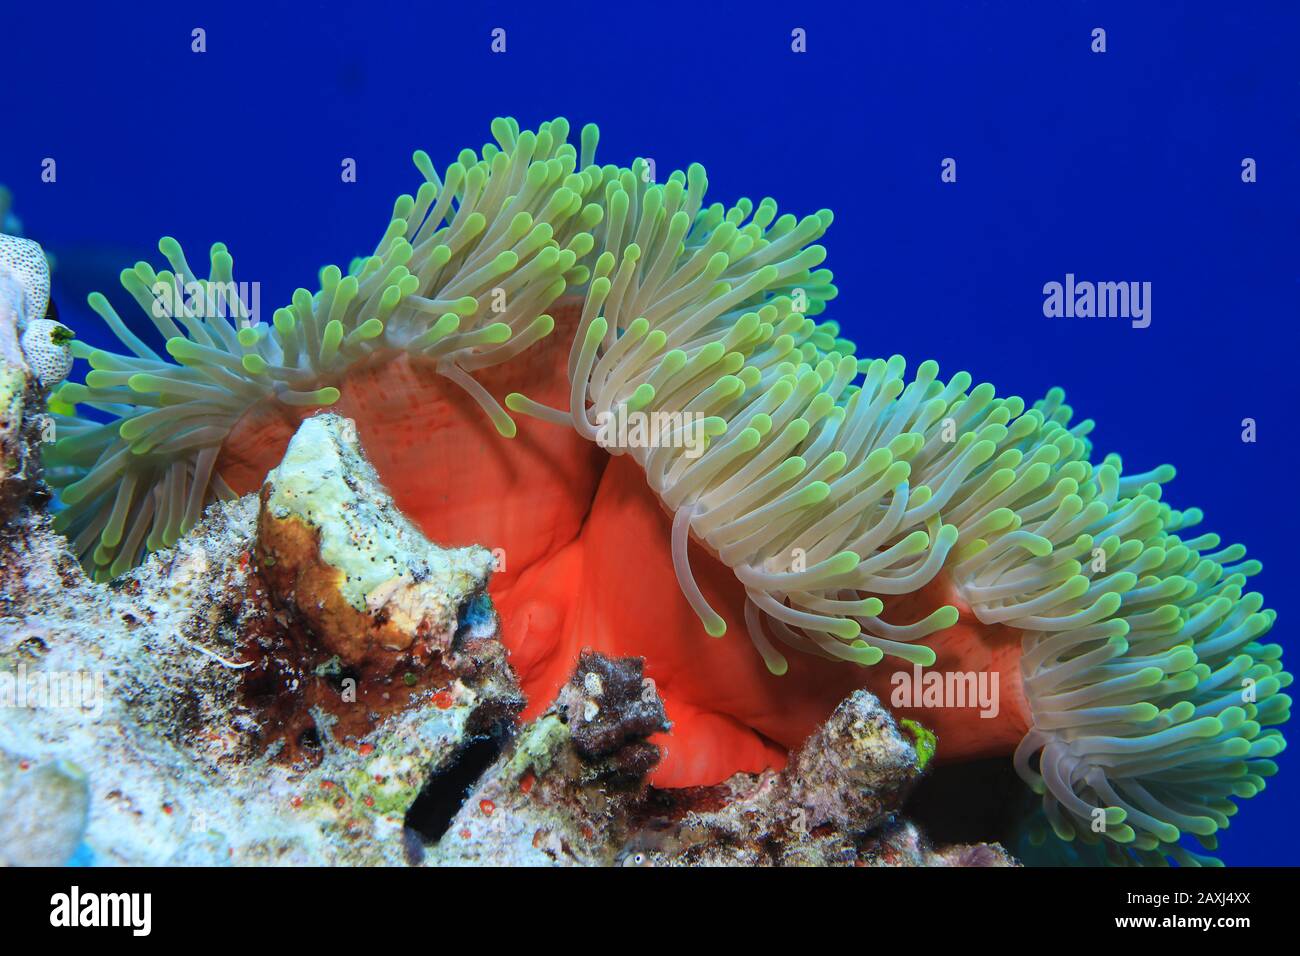 Magnificent sea anemone (Heteractis magnifica) underwater in the tropical coral reef of the indian ocean Stock Photo